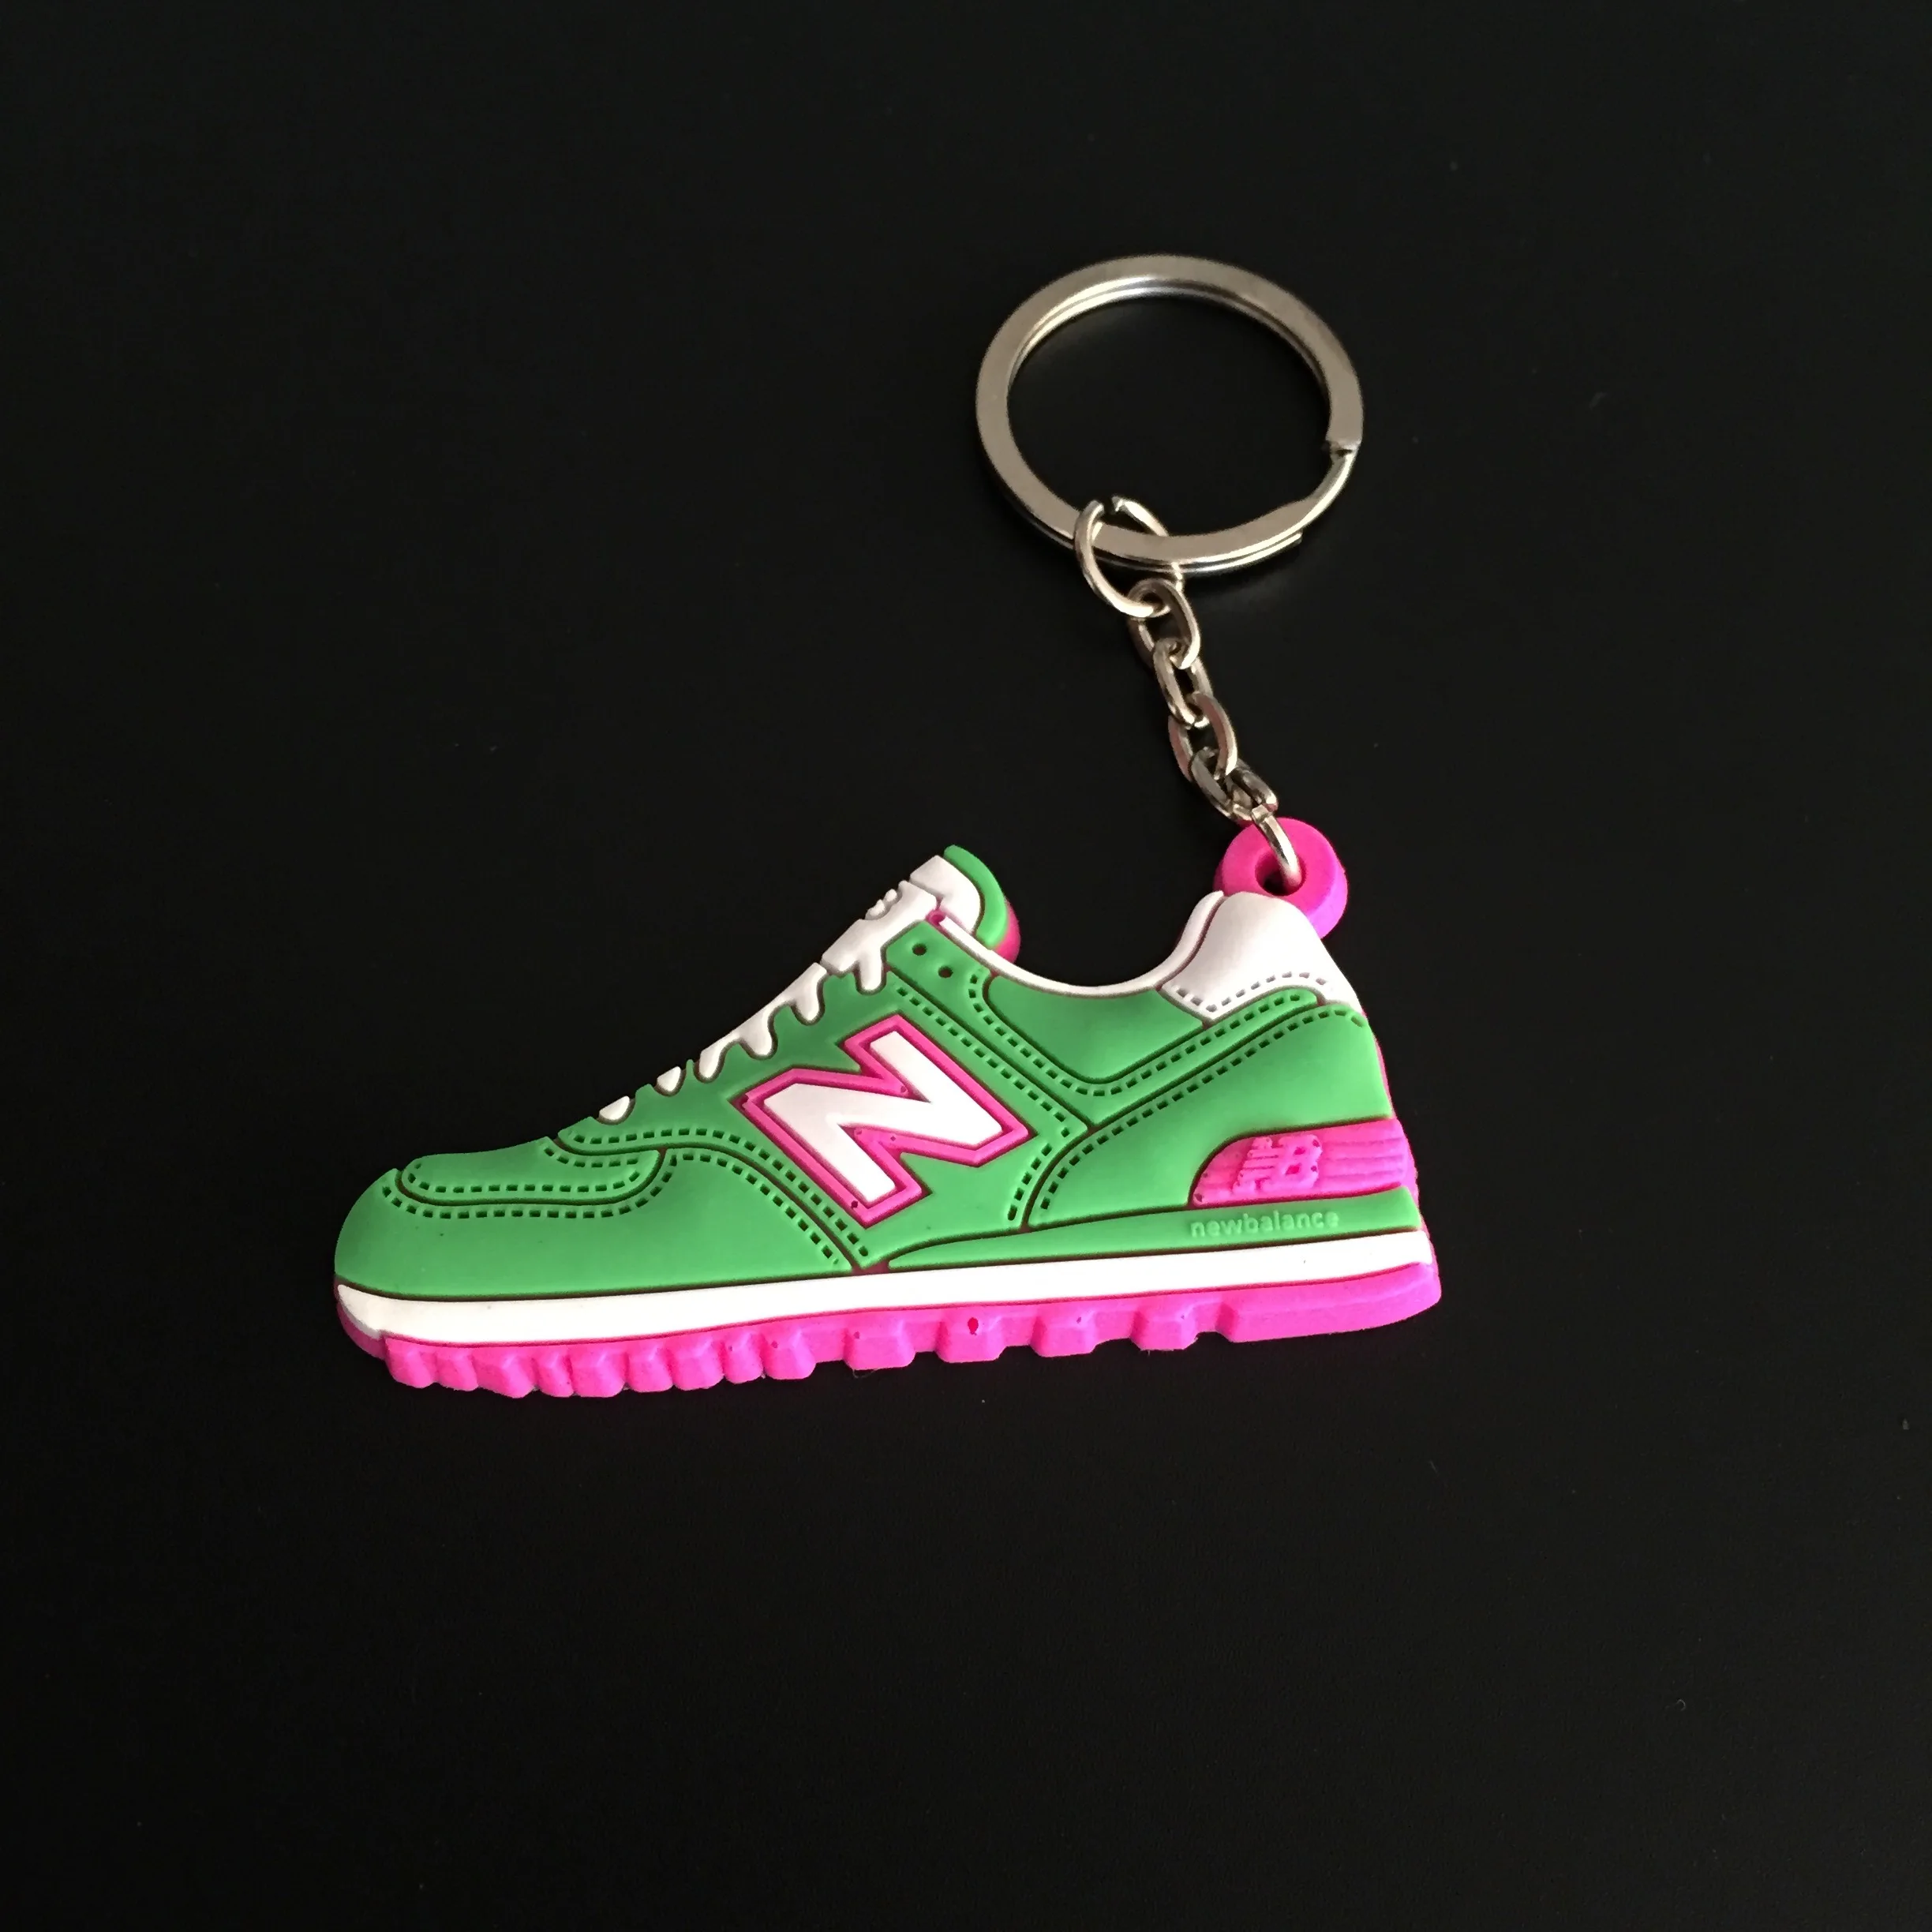 Nb Sneaker Keychain New Balance Shoes 